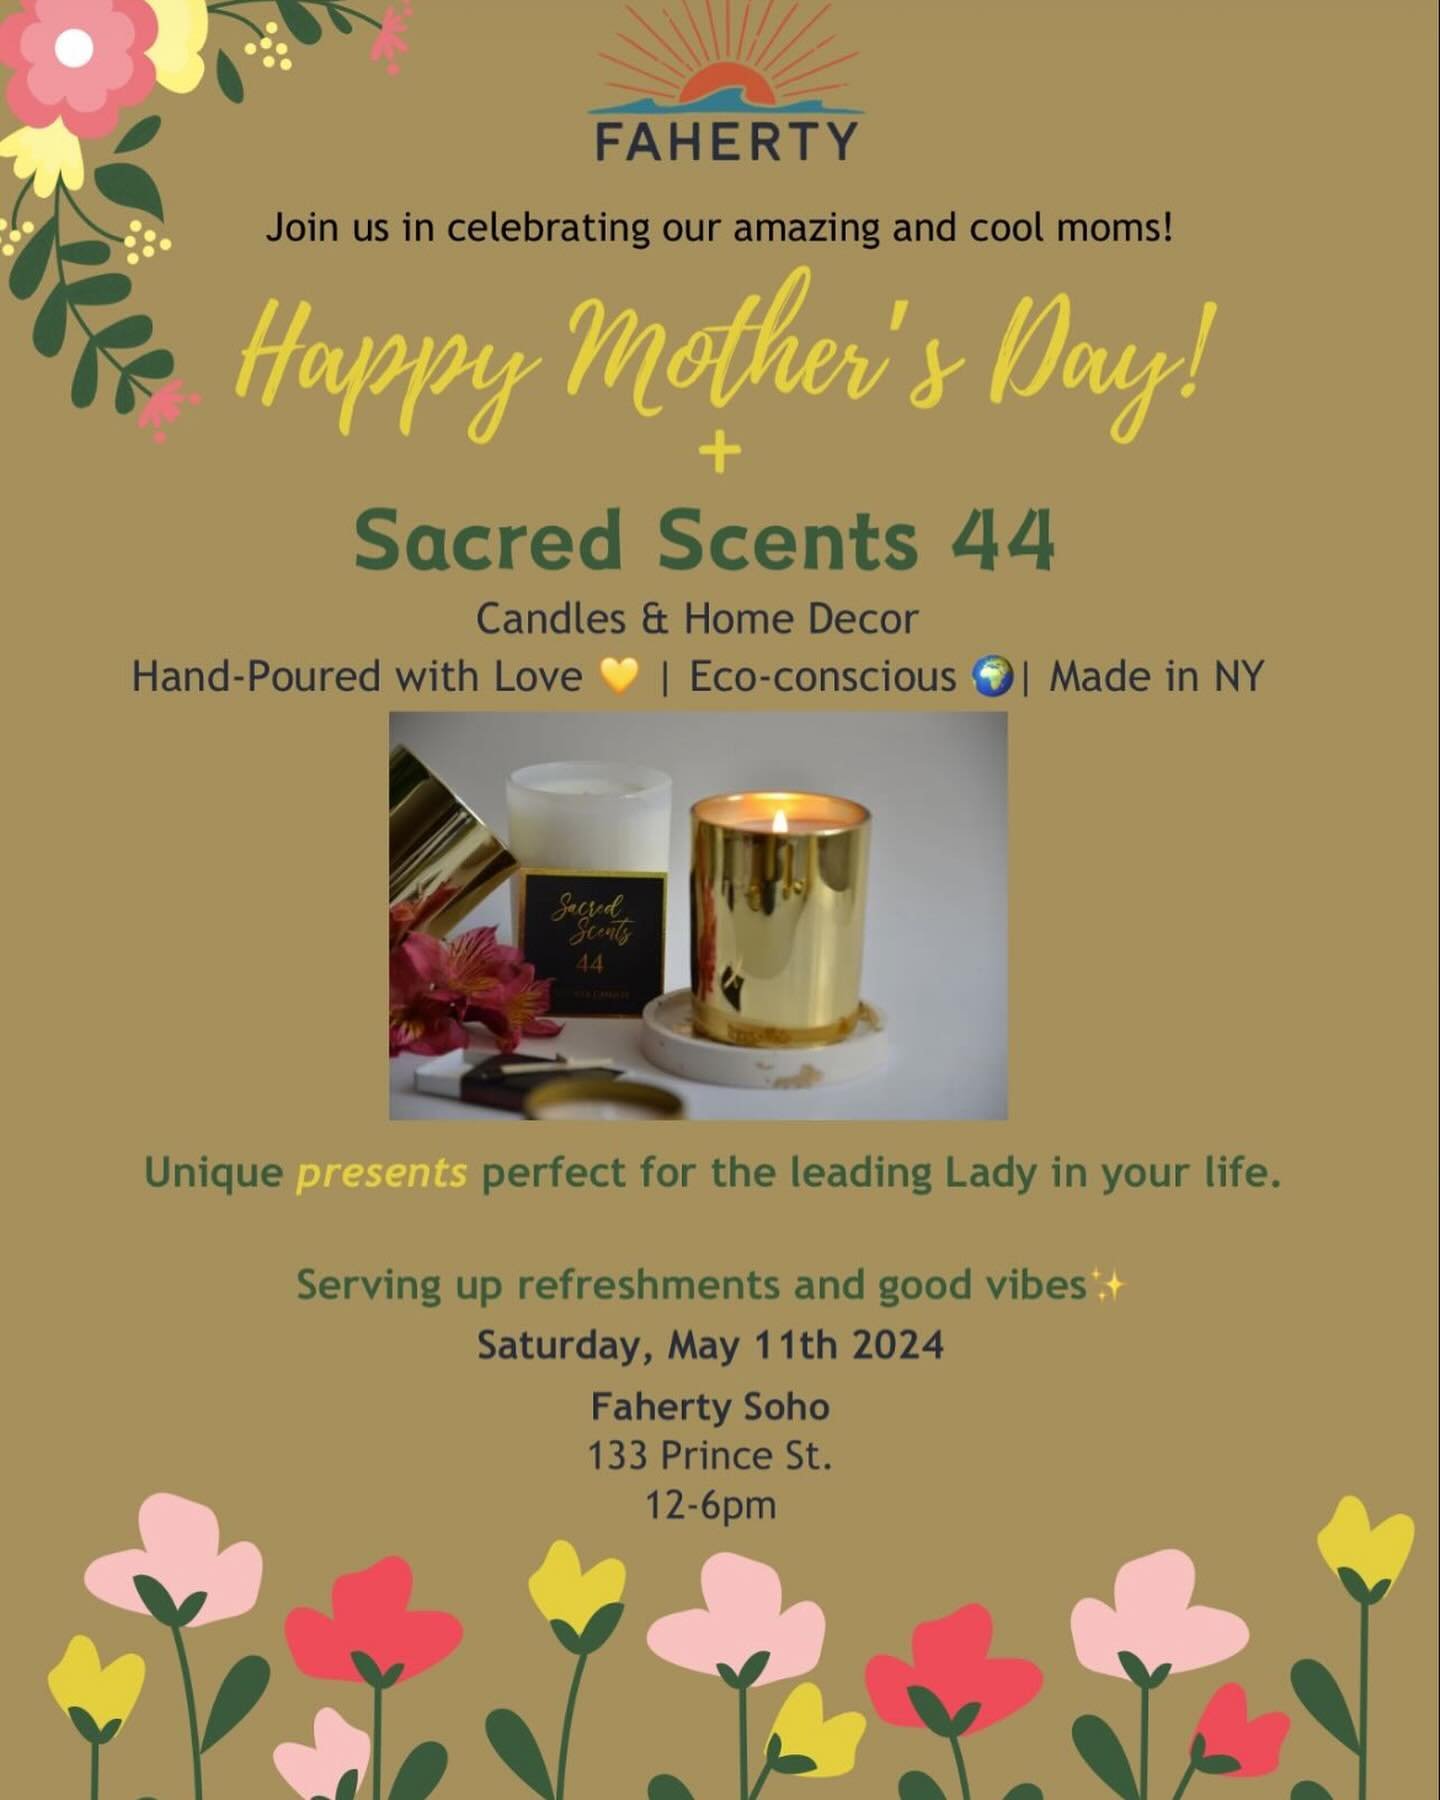 🌸Mothers Day Popup @fahertybrand 
🗓️: May 11th
⏰: 12-6pm 
📍: 133 Prince St. NYC

Enjoy a variety of home fragrances ✨🌸
#sacredscents44 #nycfinds #mothersdaygift